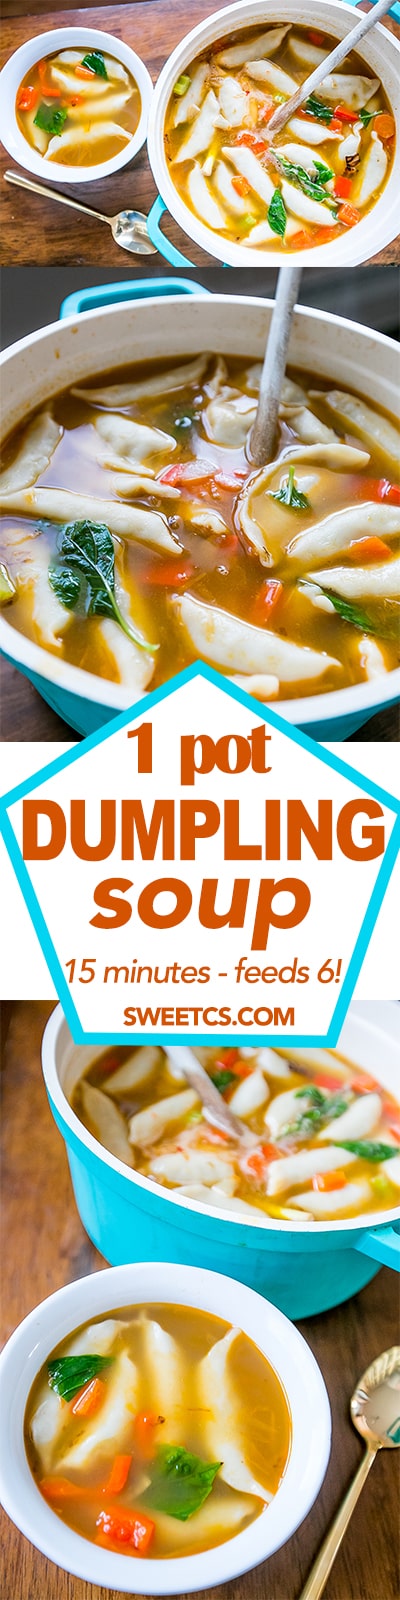 1 pot dumpling soup- a delicious easy meal that feeds a crowd fast!